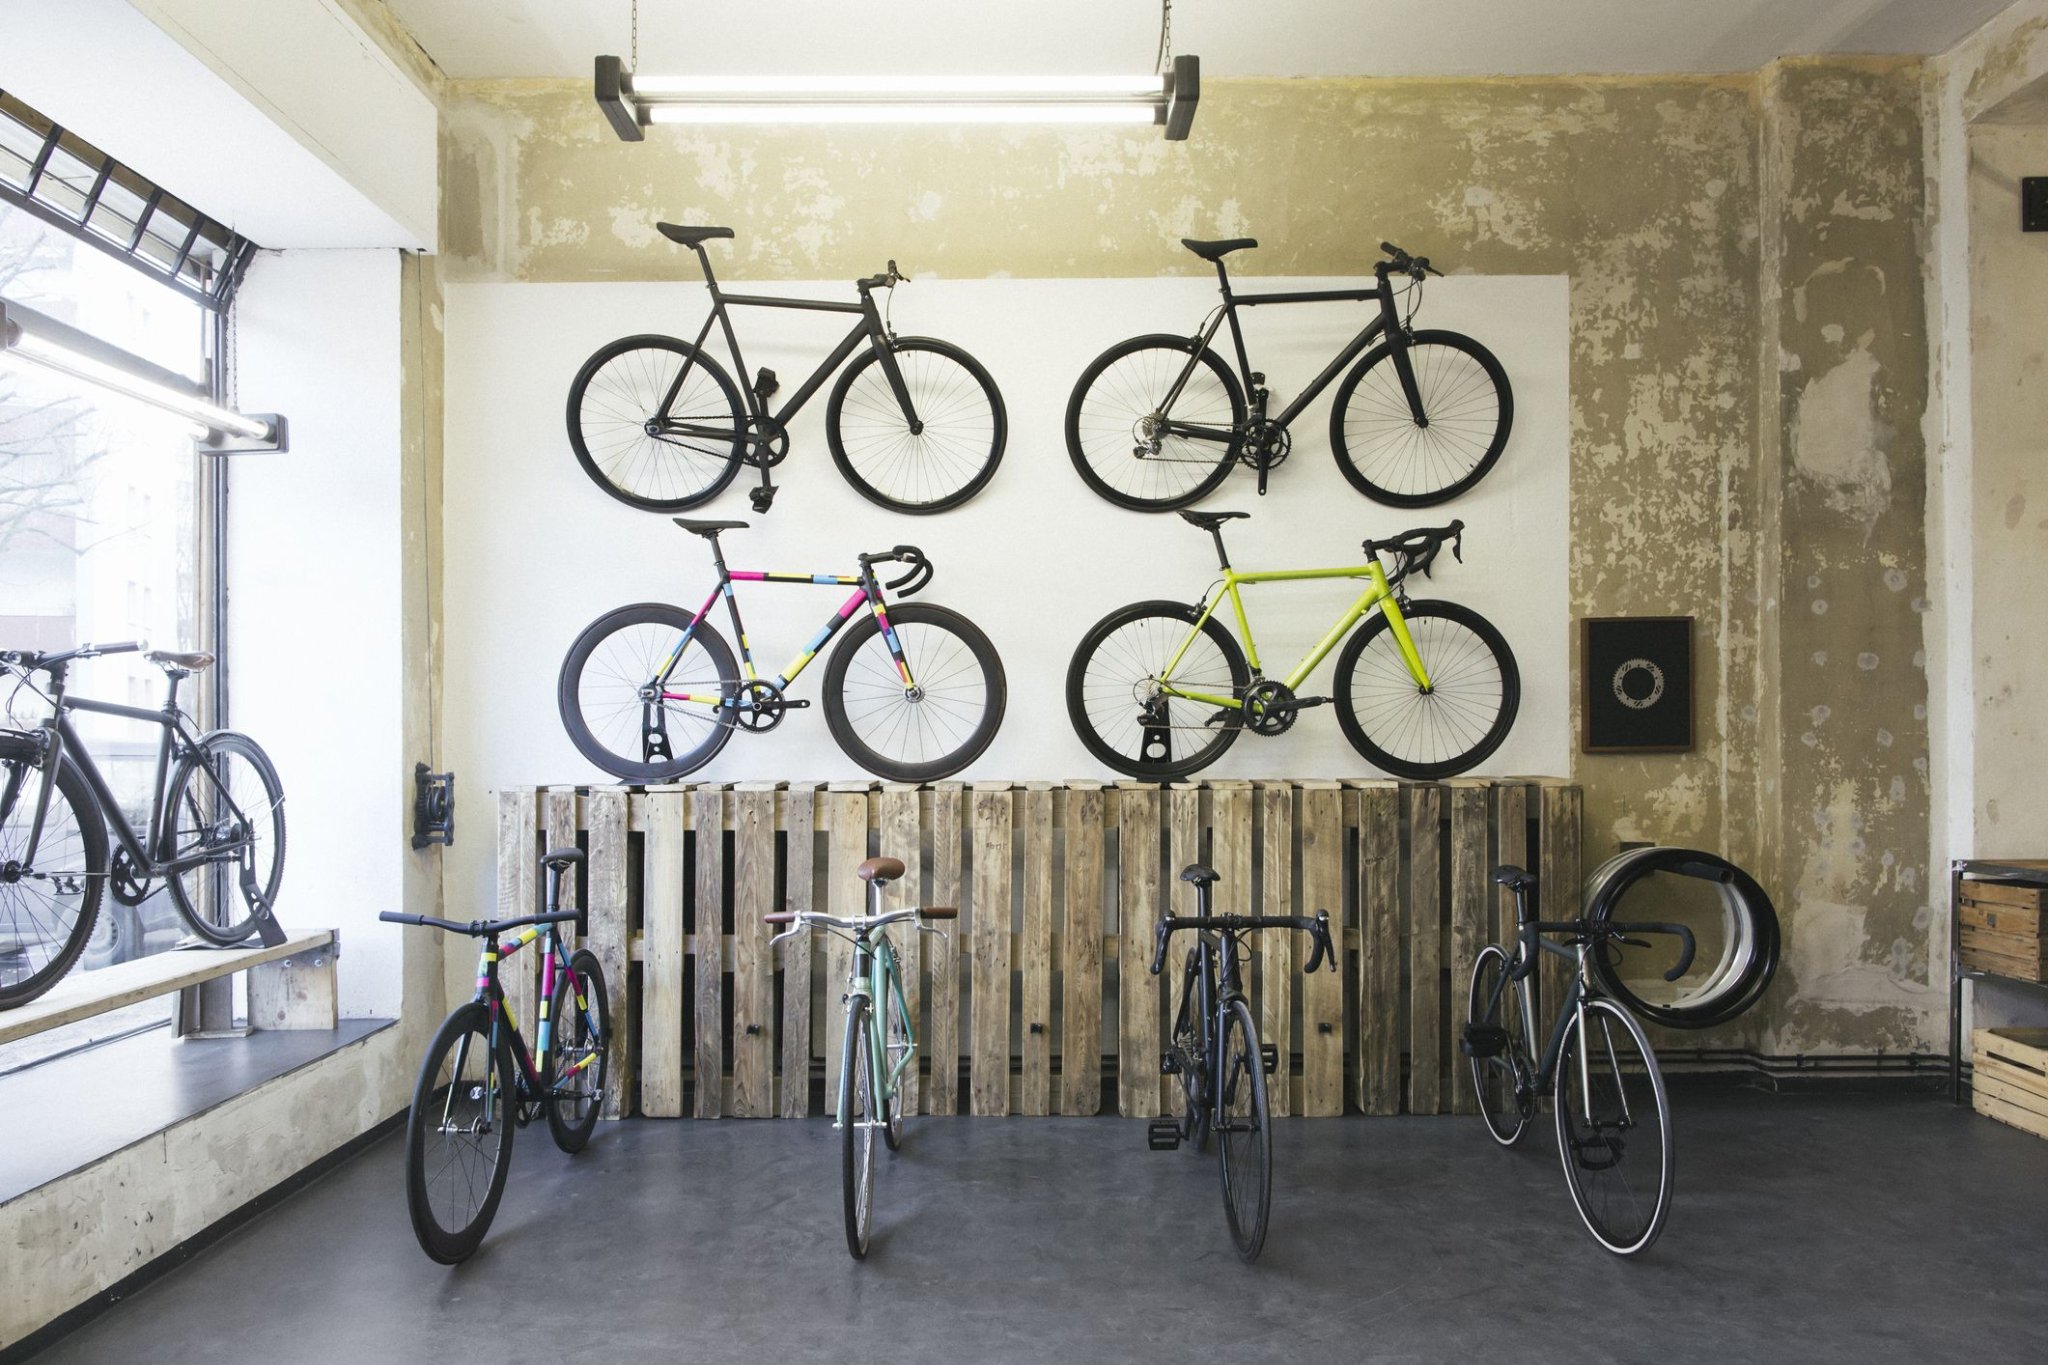 The 10 Best Places to Buy Bikes in 2022